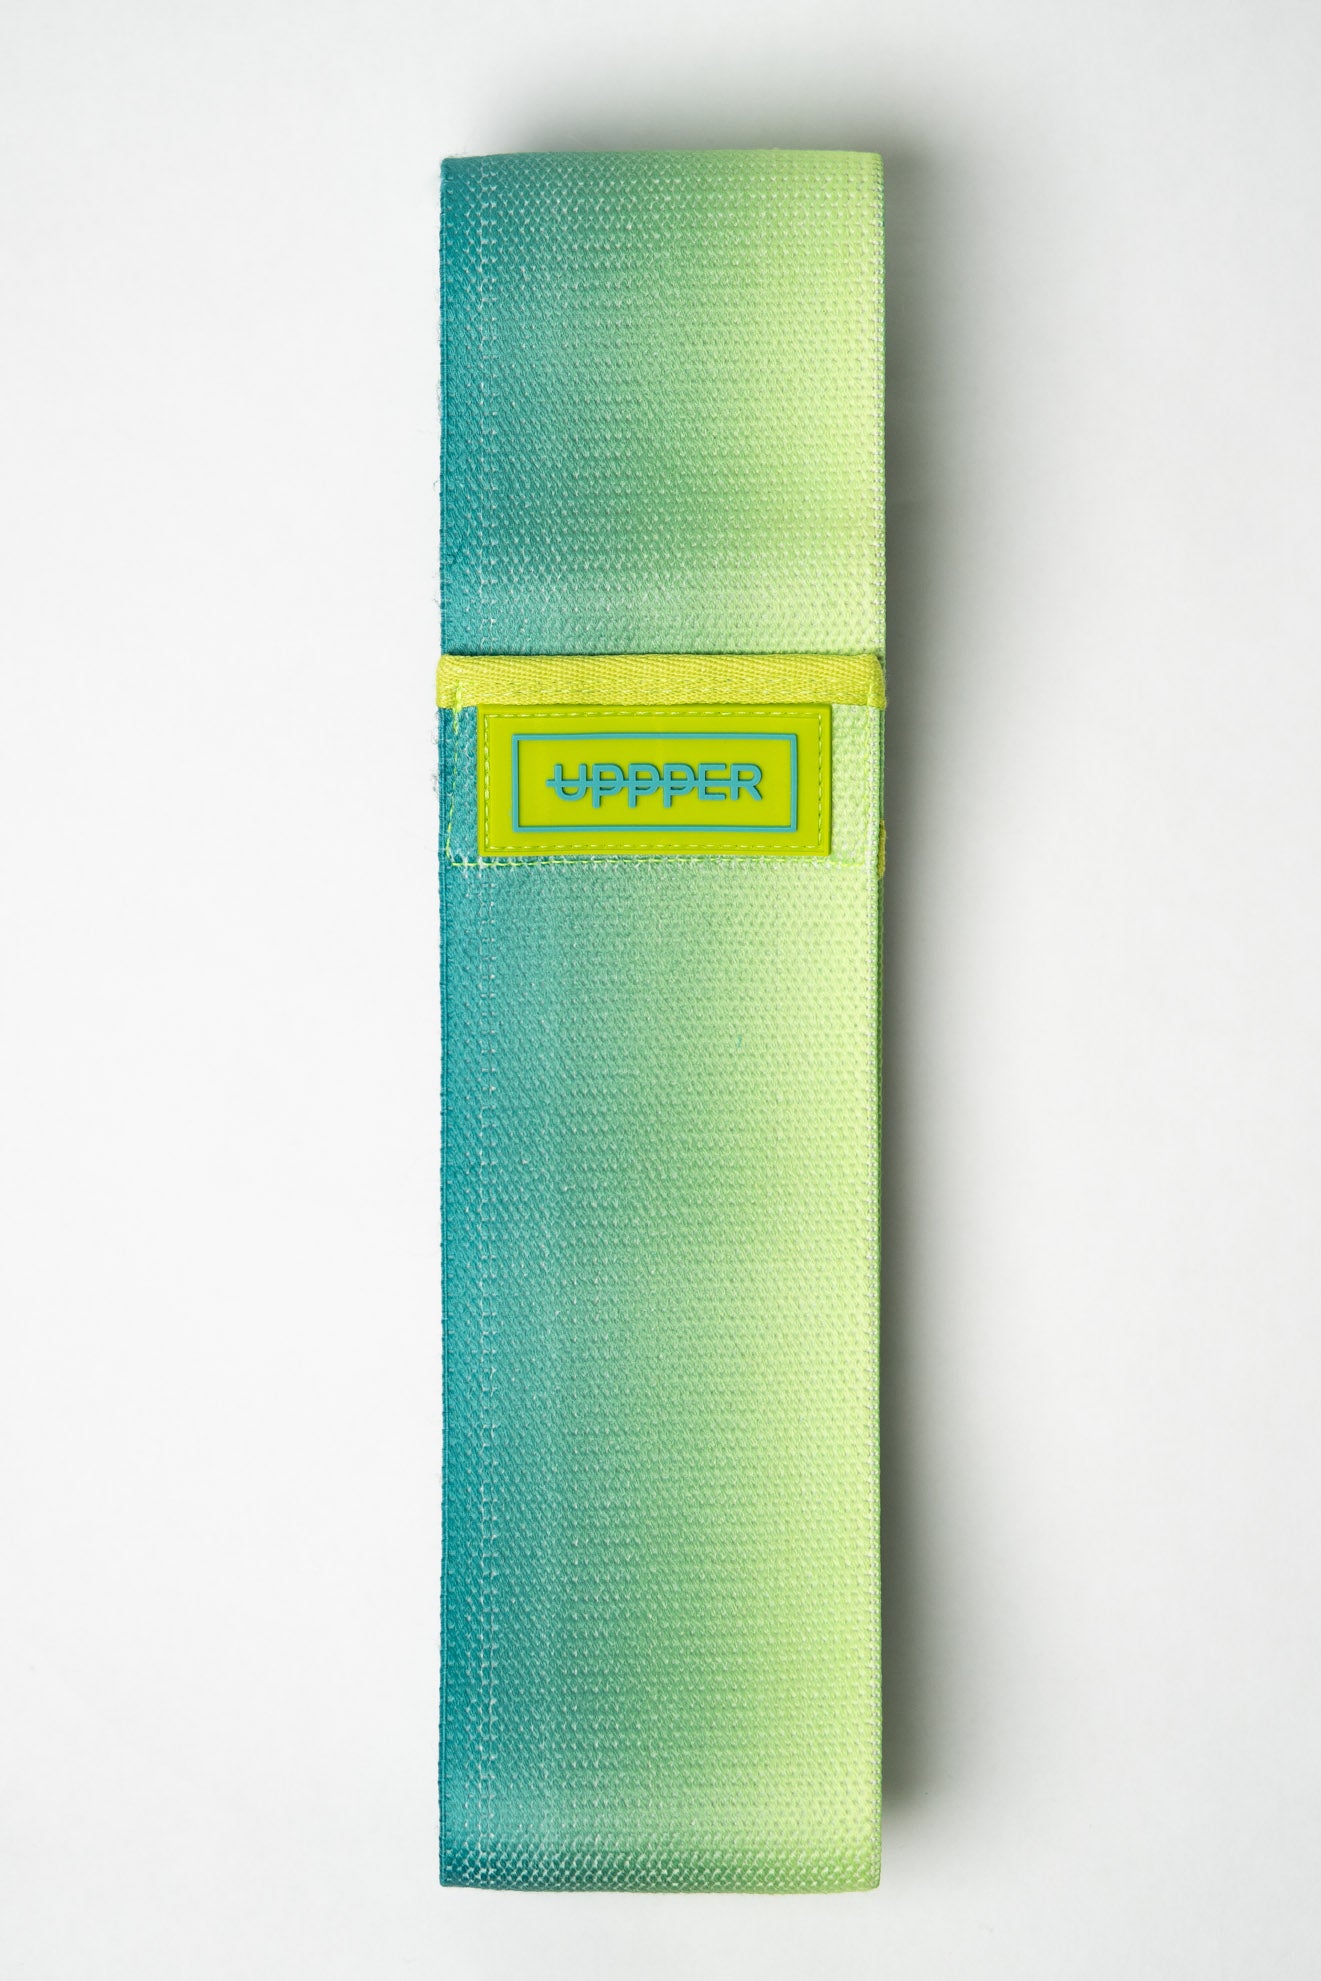 uppper hip resistance band green ombre